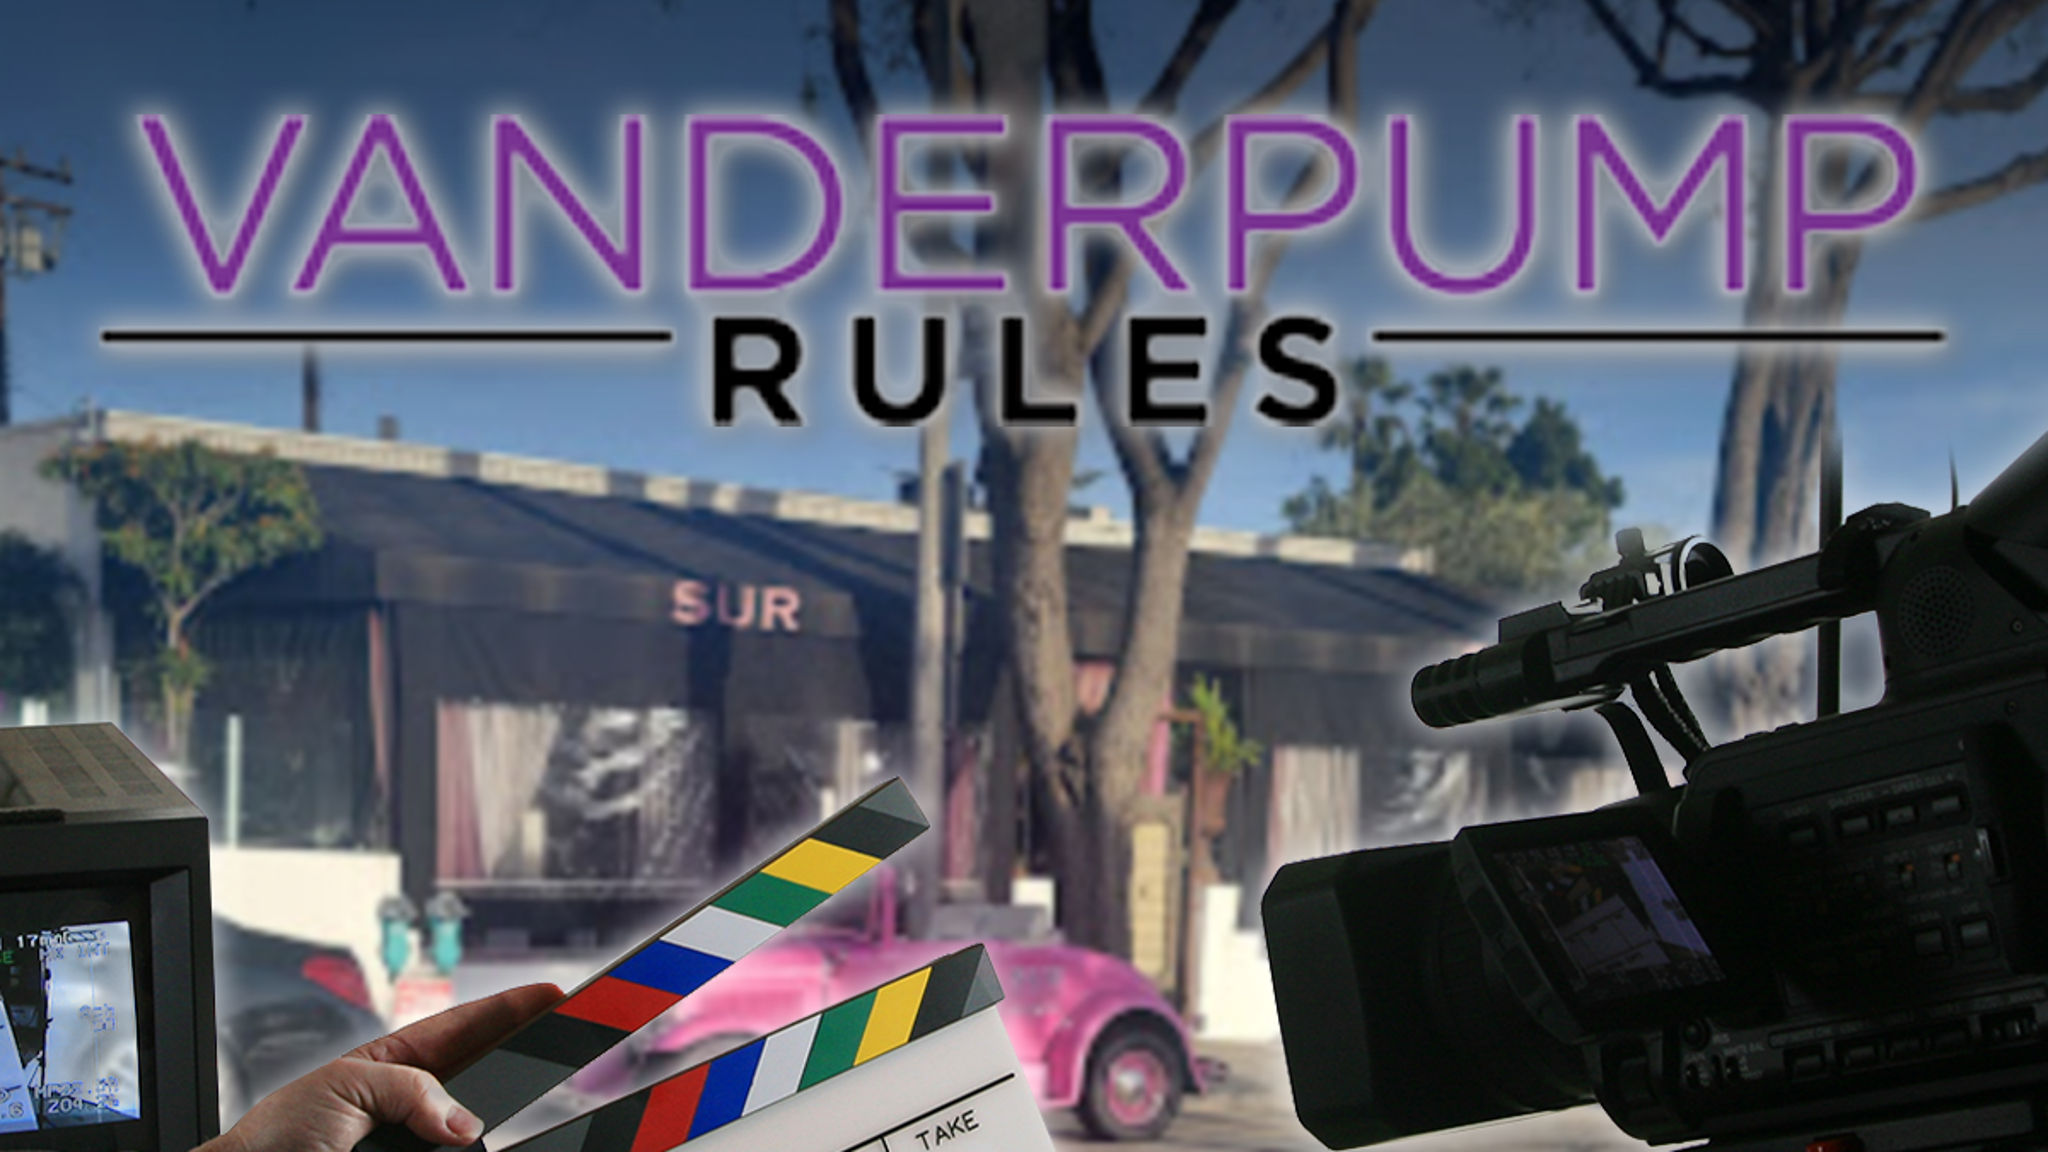 'Vanderpump Rules' Taking Brief Production Pause, Not Filming This Summer